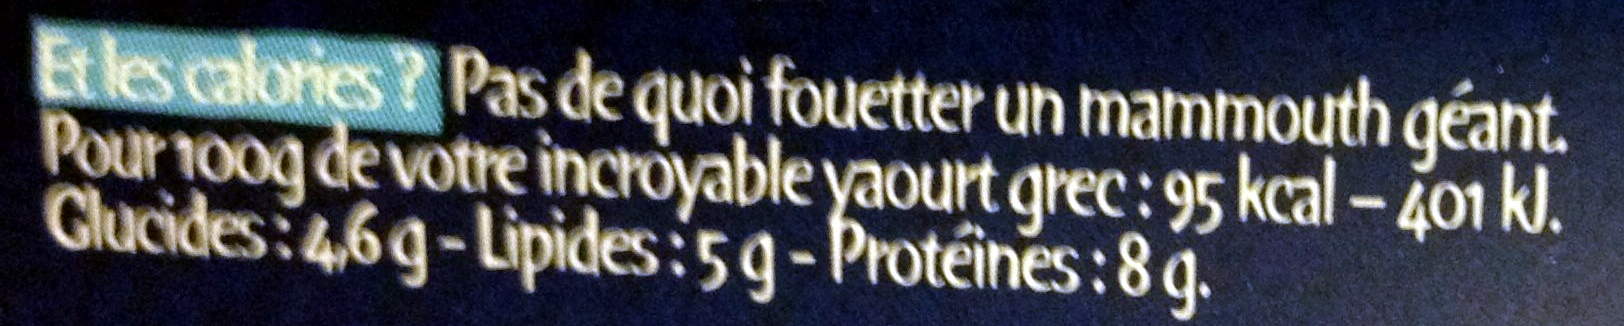 Le yaourt grec nature - Nutrition facts - fr